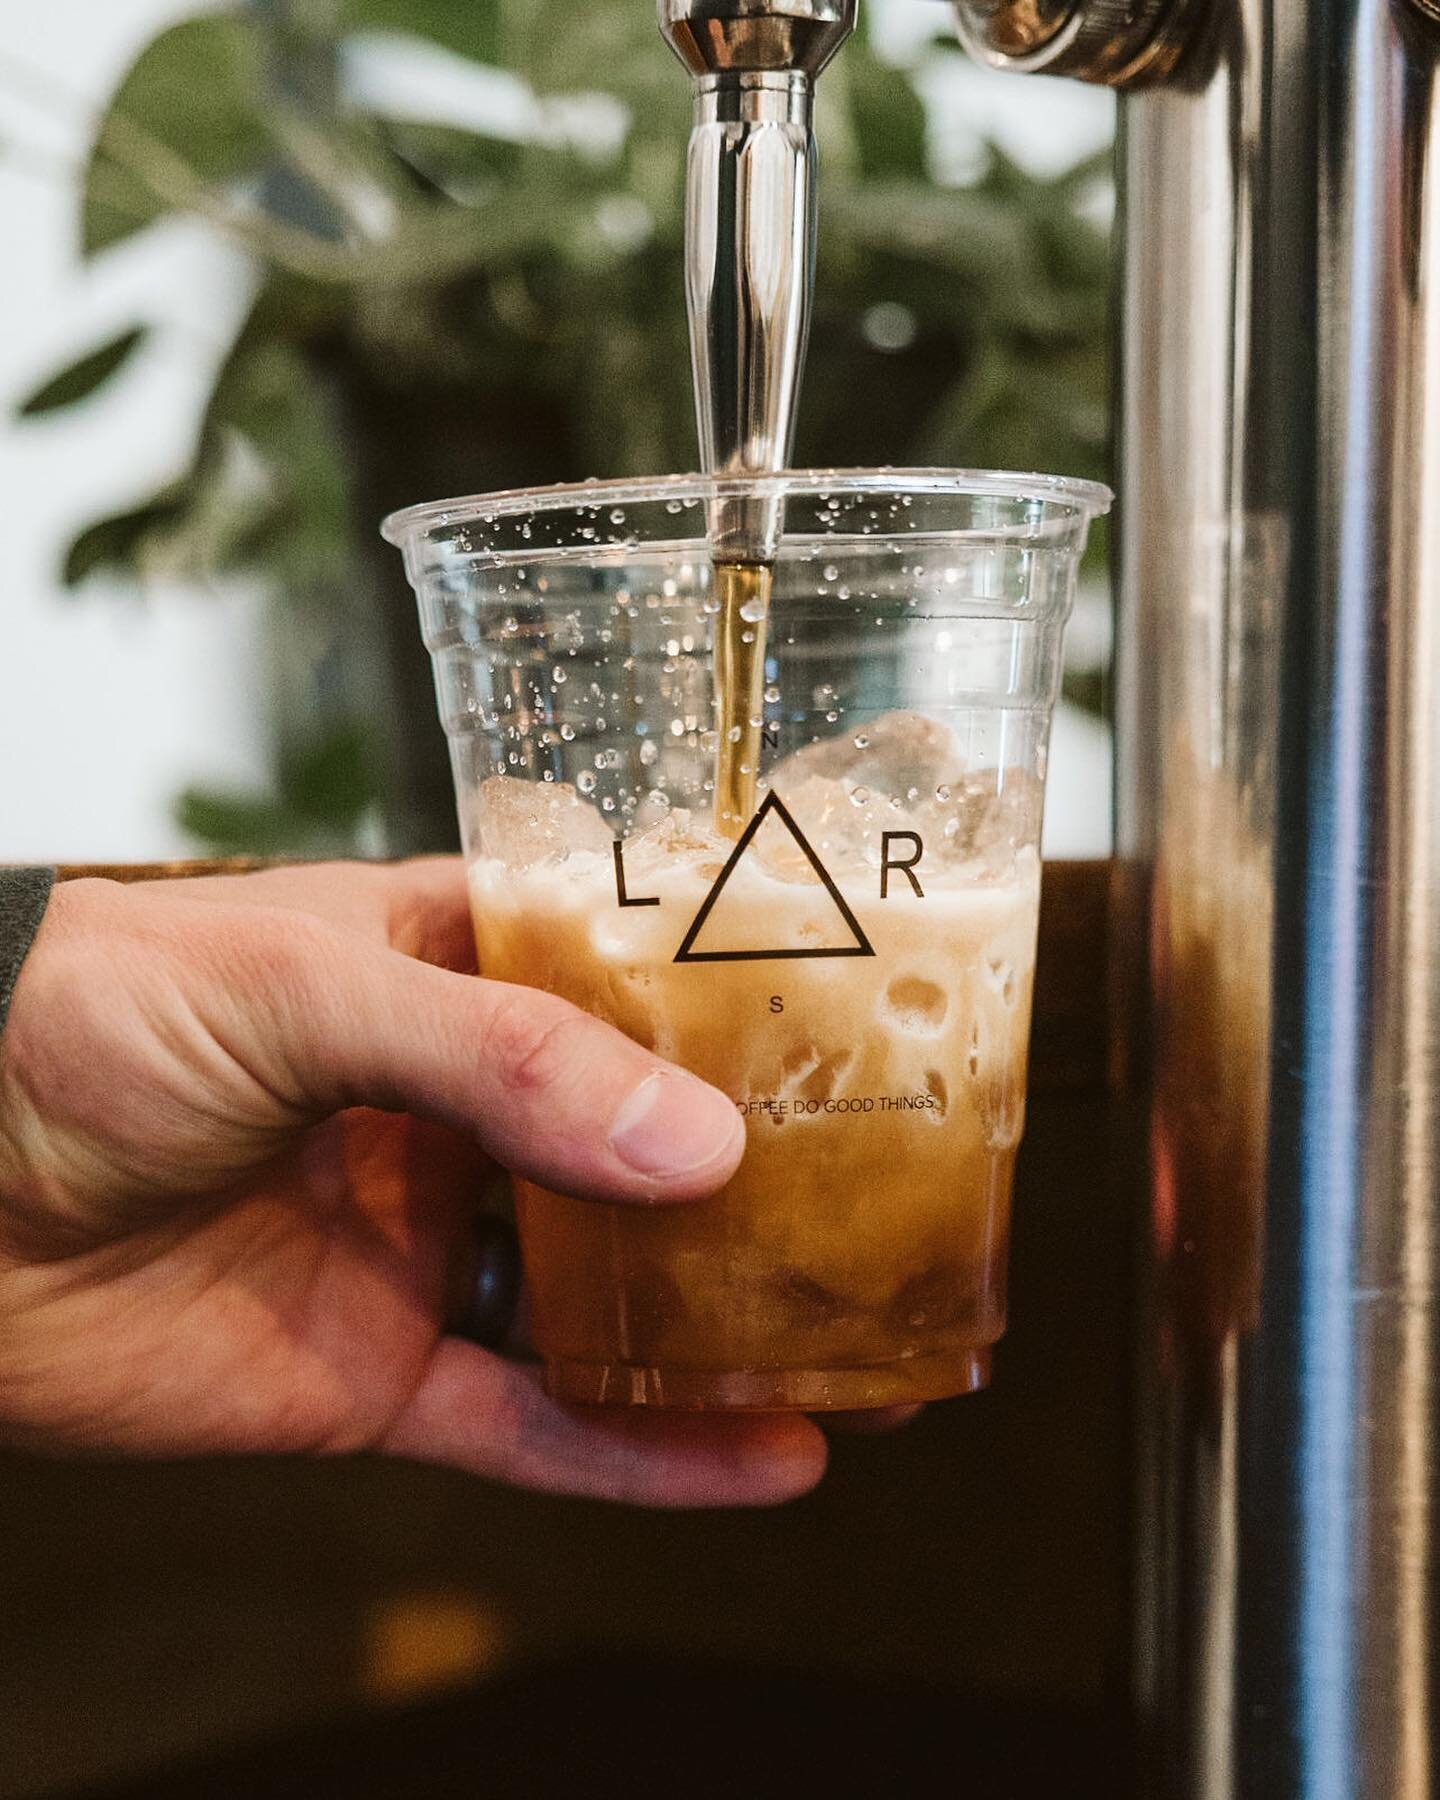 Where it all started. 😌

Many options to enjoy our Colombia Nitro Cold Brew. Try it Straight Up or with one of our signature hand whipped creamy toppings.

6 Mix Pack option now available in the Craft Cooler. Build one for $15! (Only 1 &lsquo;top sh